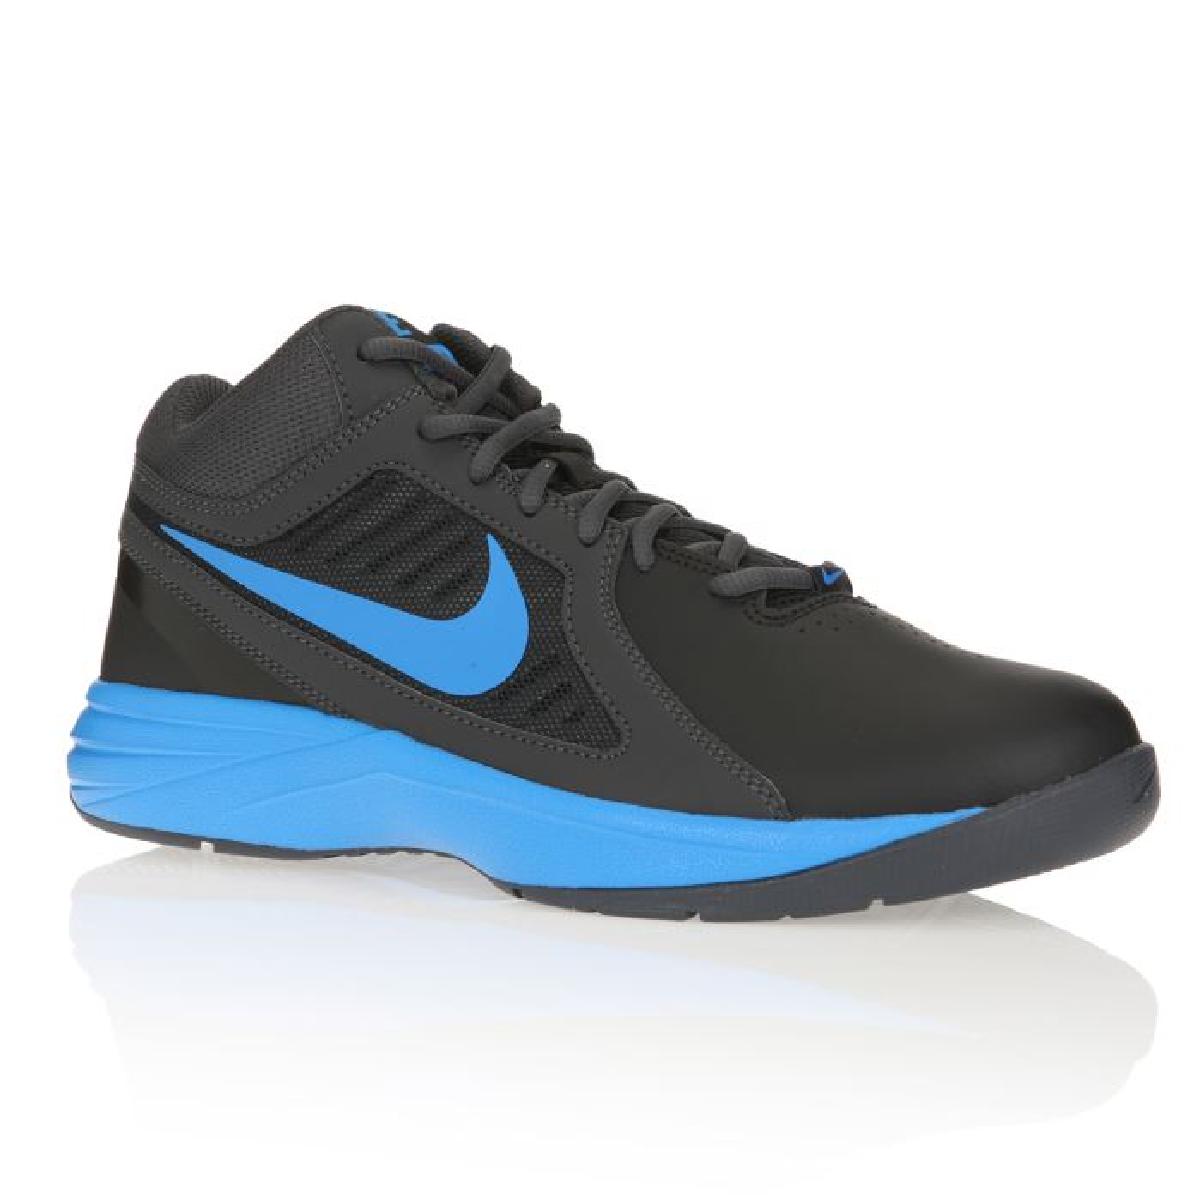 nike chaussures basket the overplay viii homme, nike chaussures basket the overplay viii homme